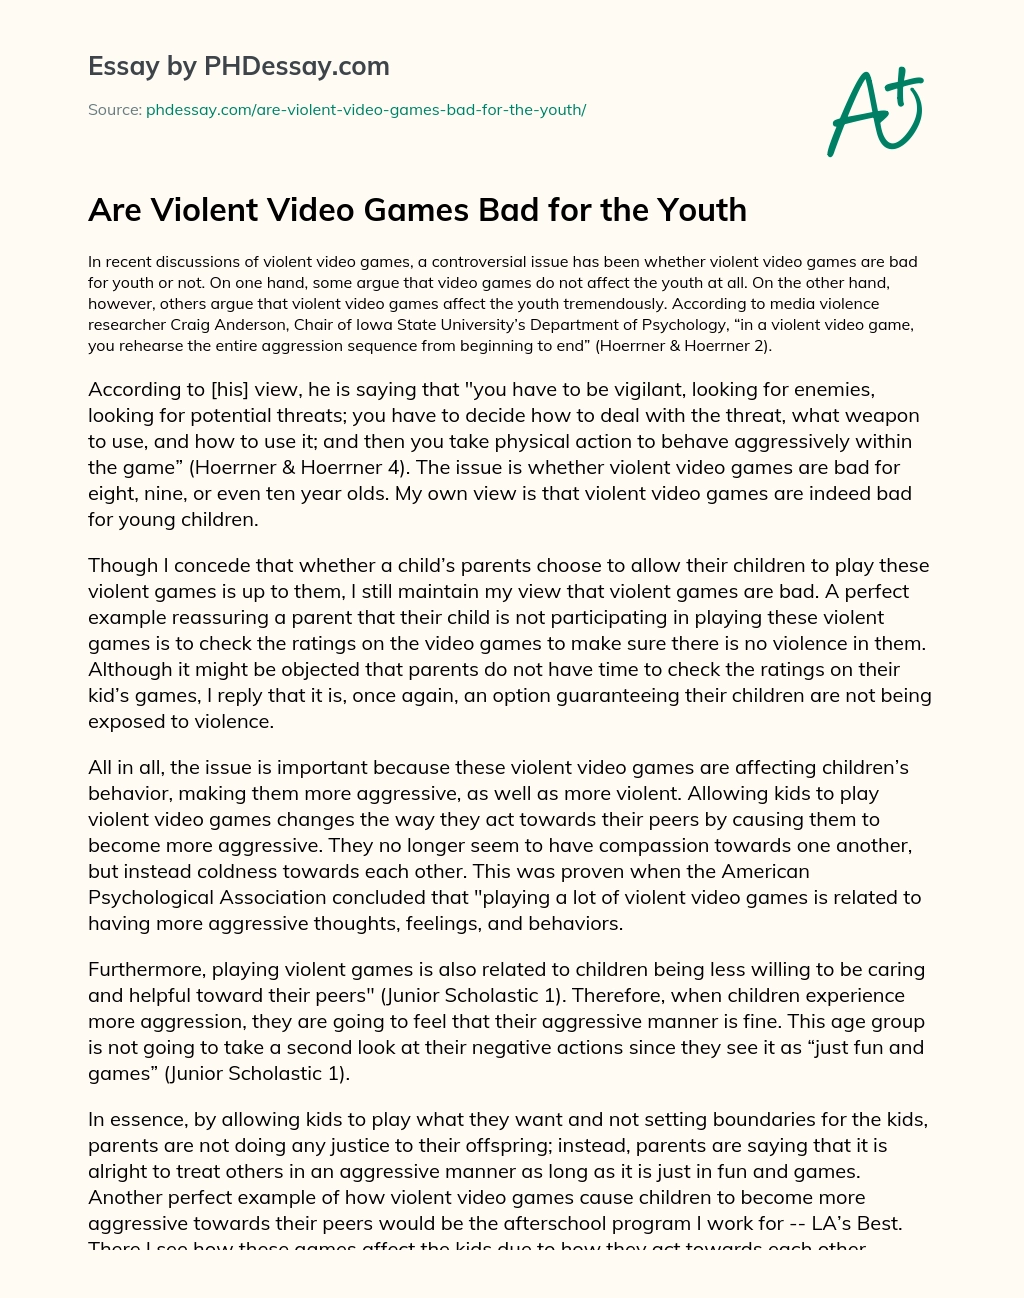 effects of violent video games essay